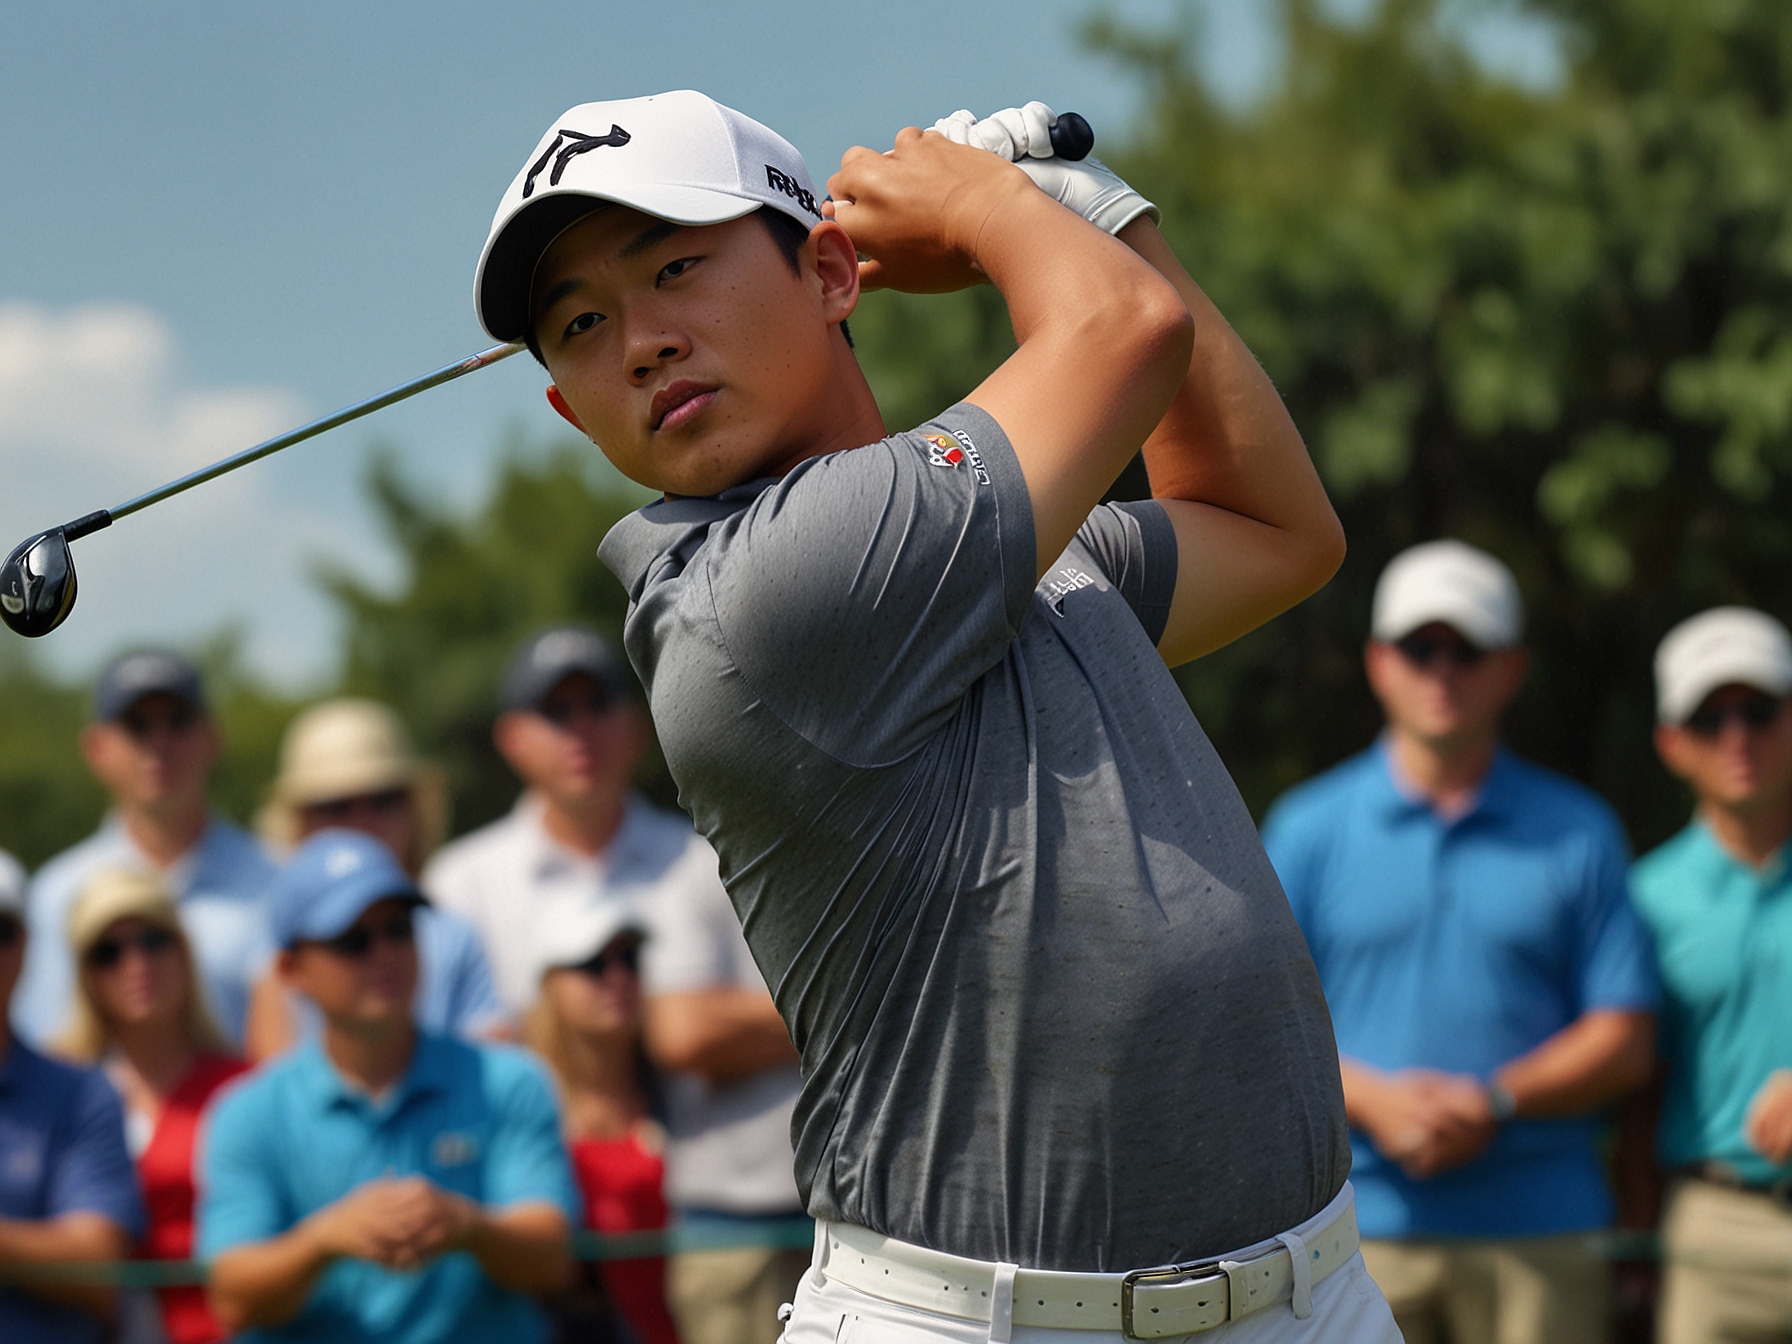 Tom Kim tees off at the Travelers Championship, showcasing his precise swing and form. The young golfer leads by two strokes, impressing fans and competitors alike.